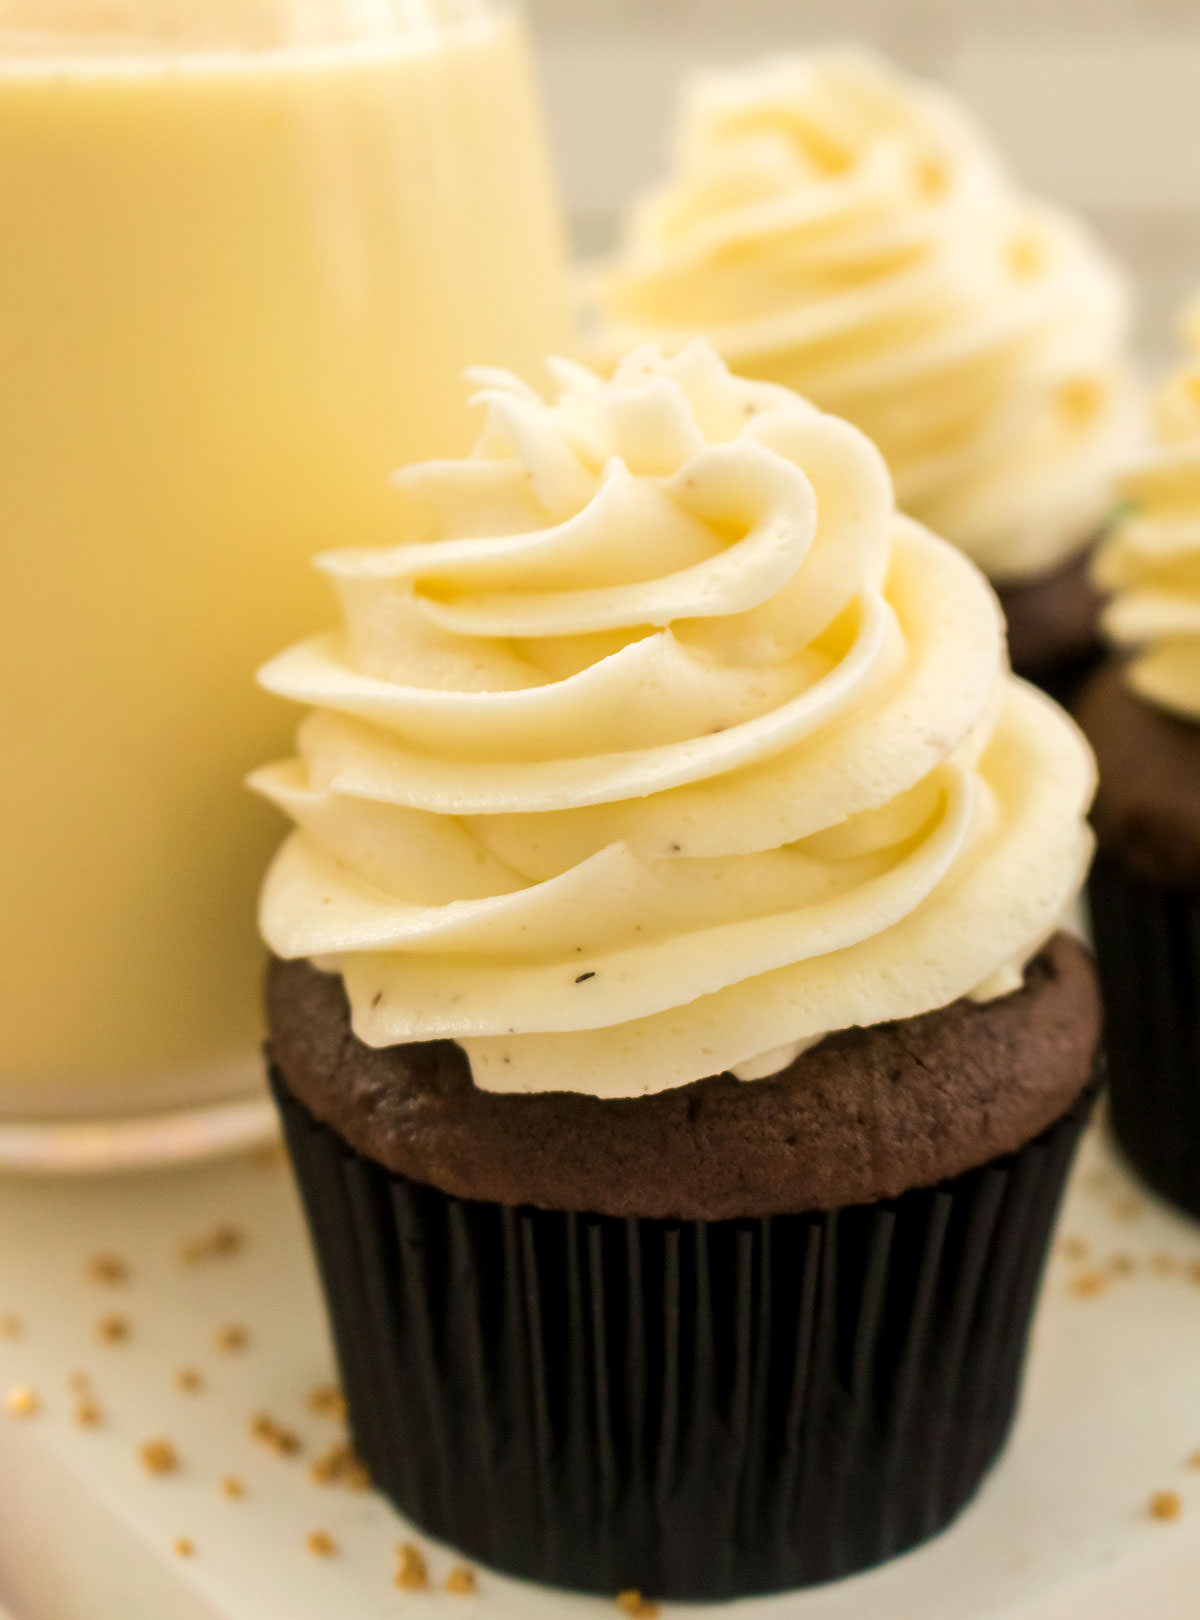 Closeup of a chocolate cupcake topped with The Best Eggnog Buttercream Frosting sitting on a white table in front of a glass of Eggnog.